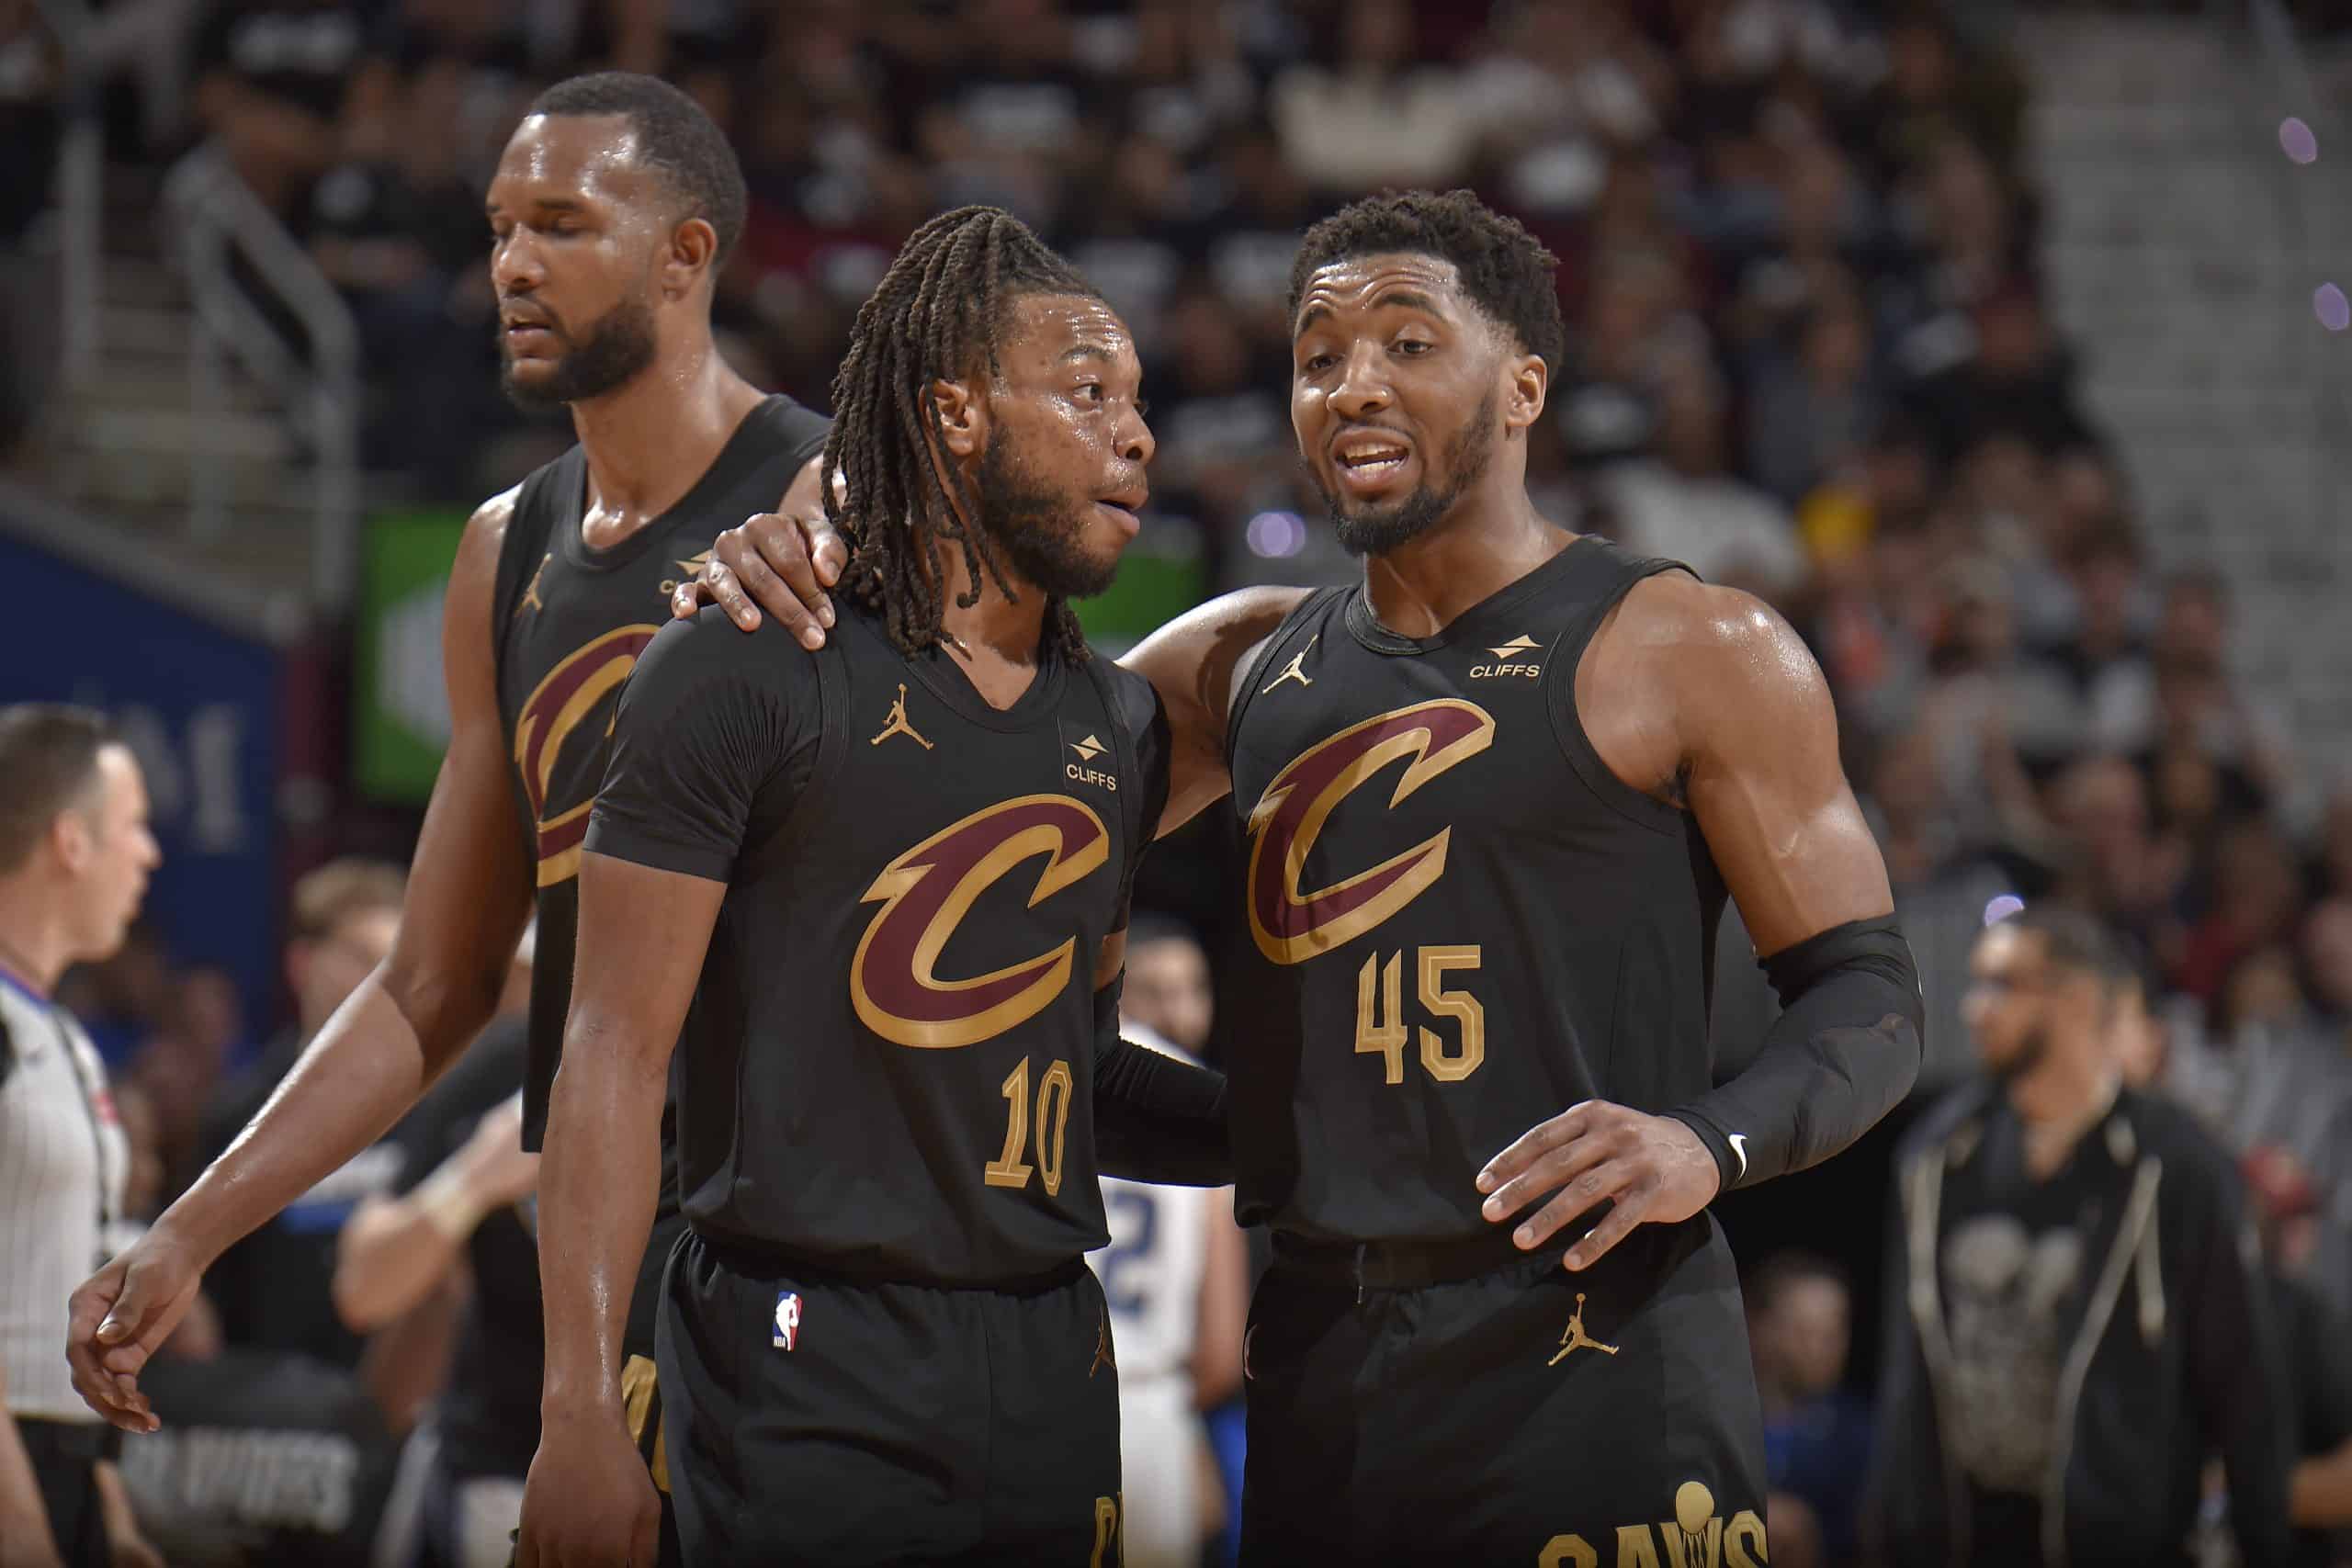 CLEVELAND, OH - MAY 5: Darius Garland #10 and Donovan Mitchell #45 of the Cleveland Cavaliers talk during the game against the Orlando Magic during Round 1 Game 7 of the 2024 NBA Playoffs on May 5, 2024 at Rocket Mortgage FieldHouse in Cleveland, Ohio. Photo by David Liam Kyle/NBAE via Getty Images